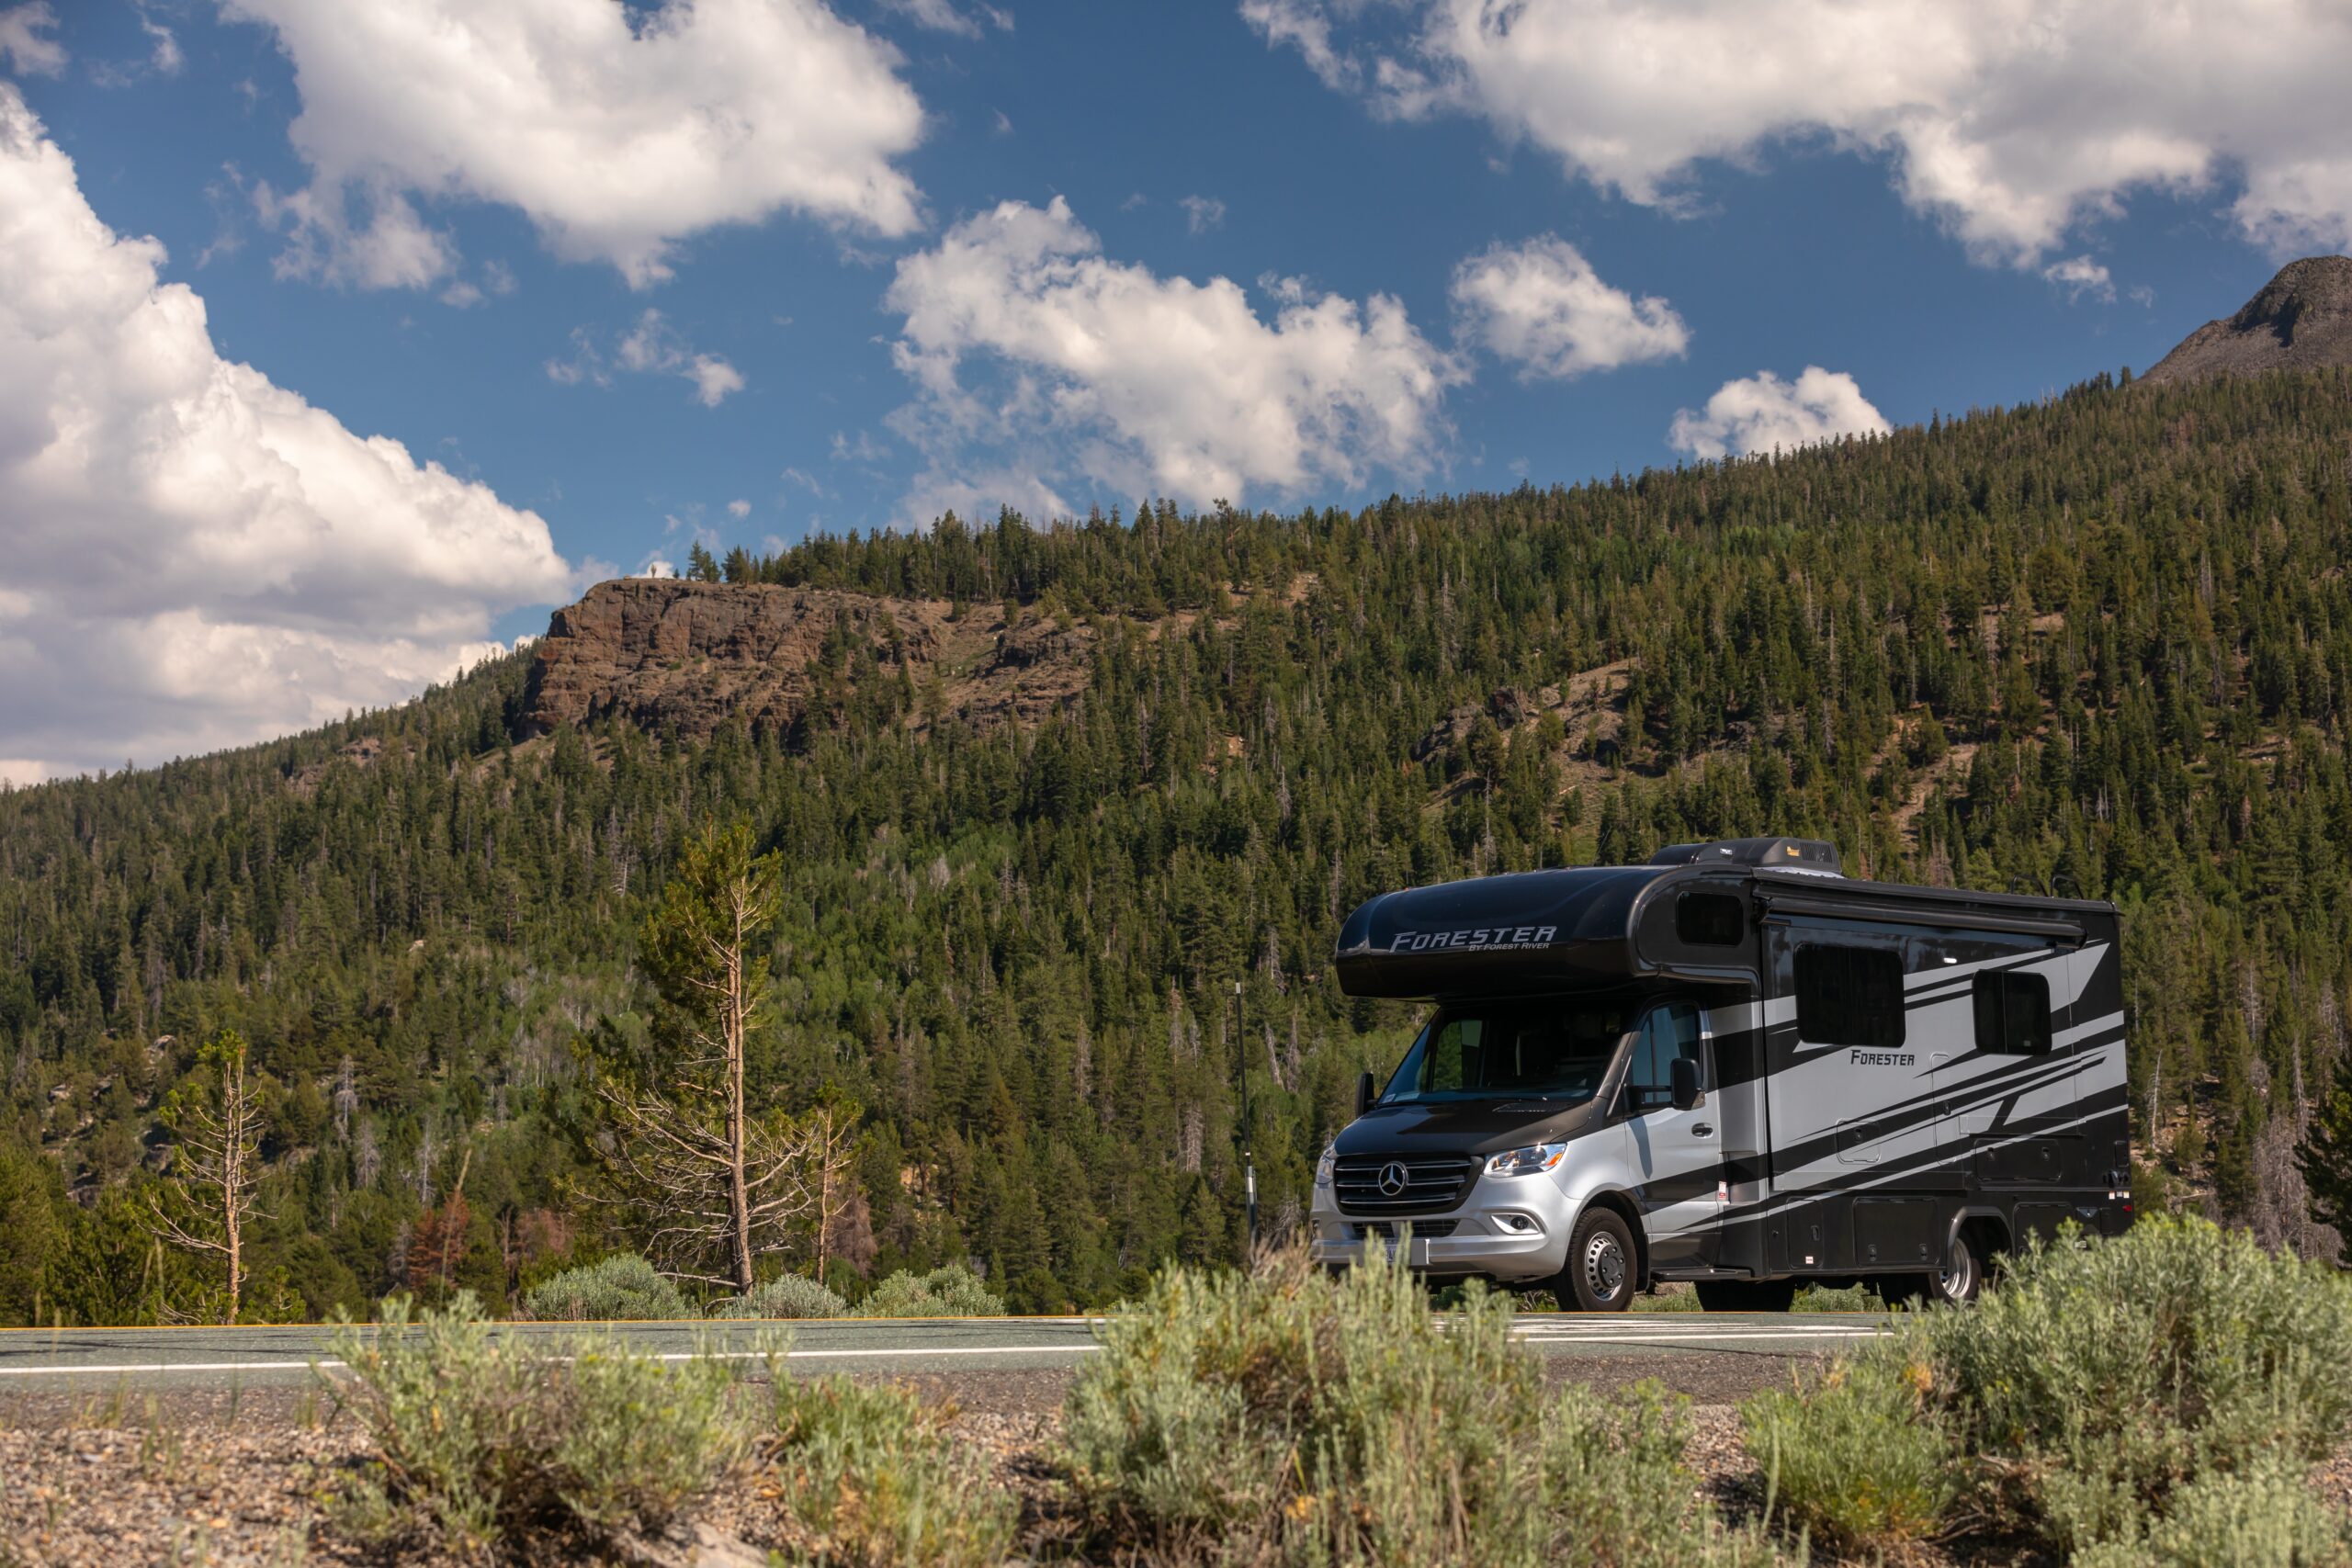 motorhome in campsite - feature image for cheap RV living forum tips